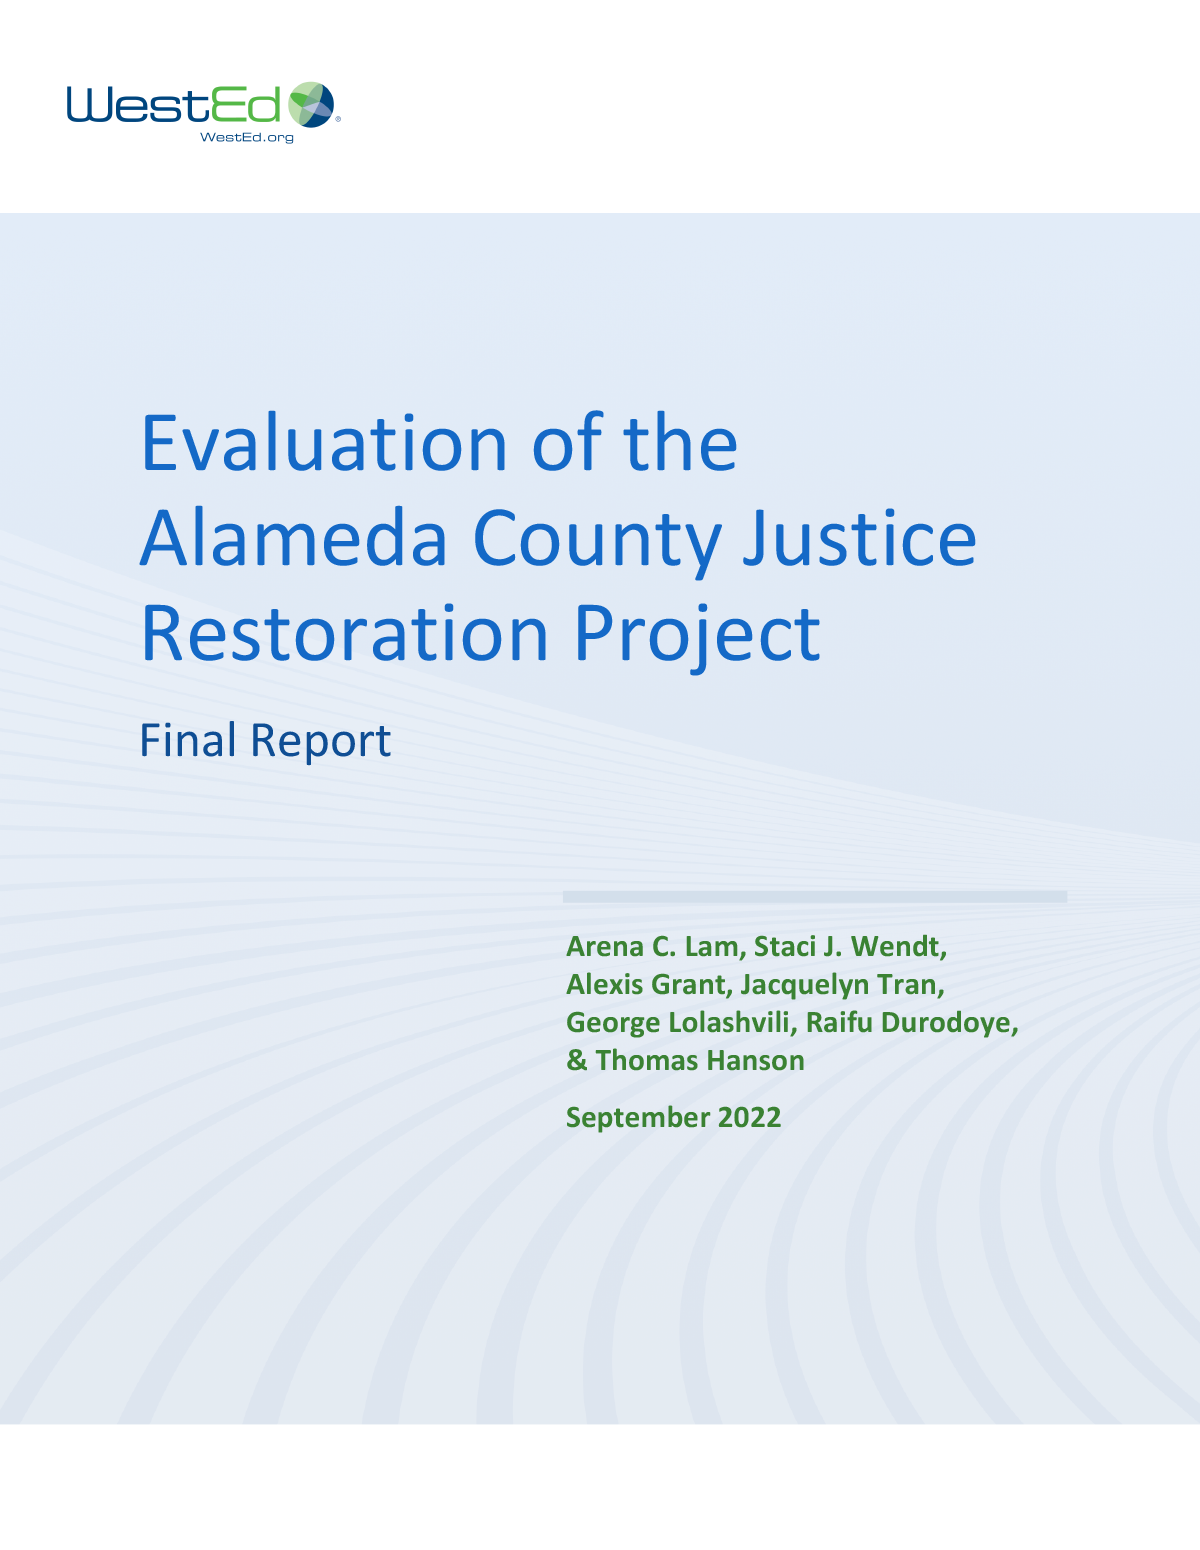 Evaluation of the Alameda County Justice Restoration Project